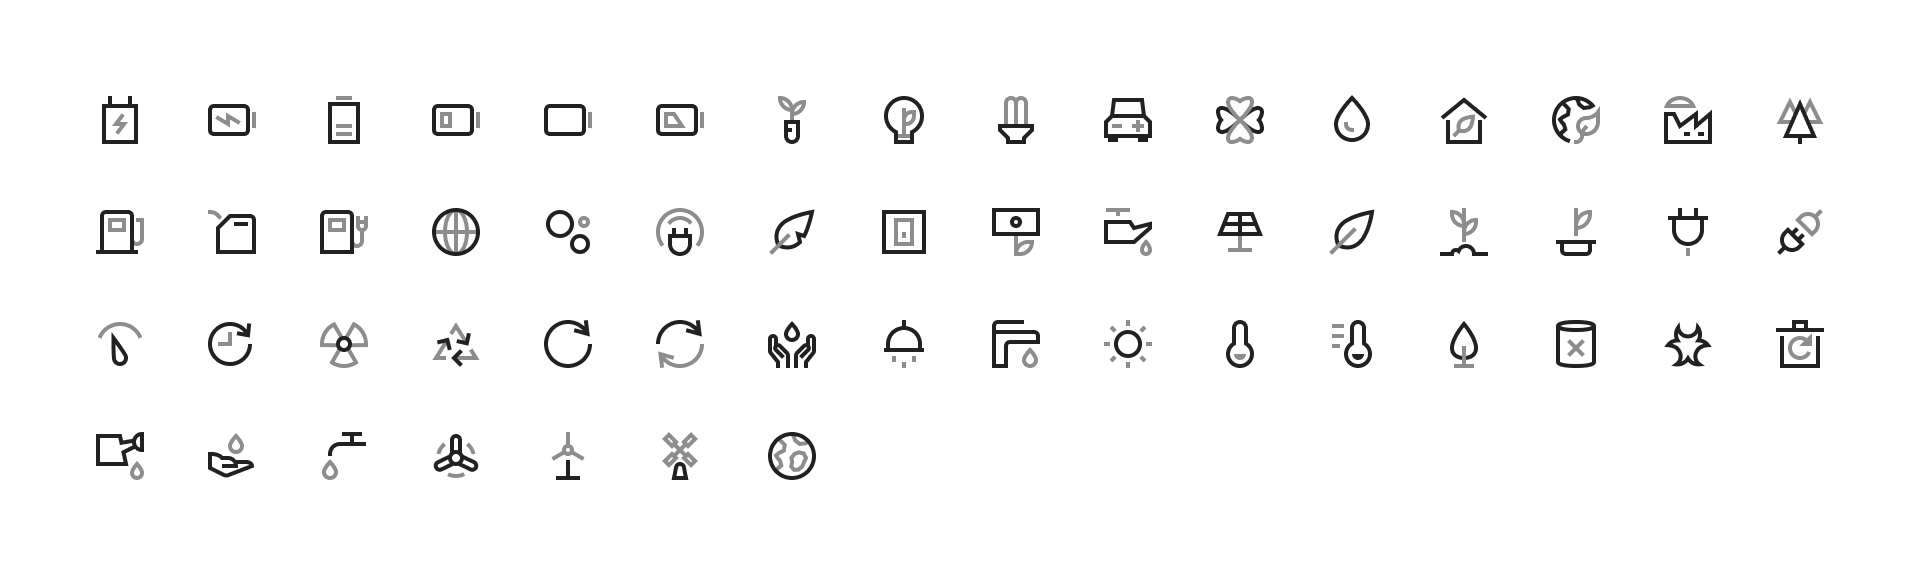 Energy and Environment Icons